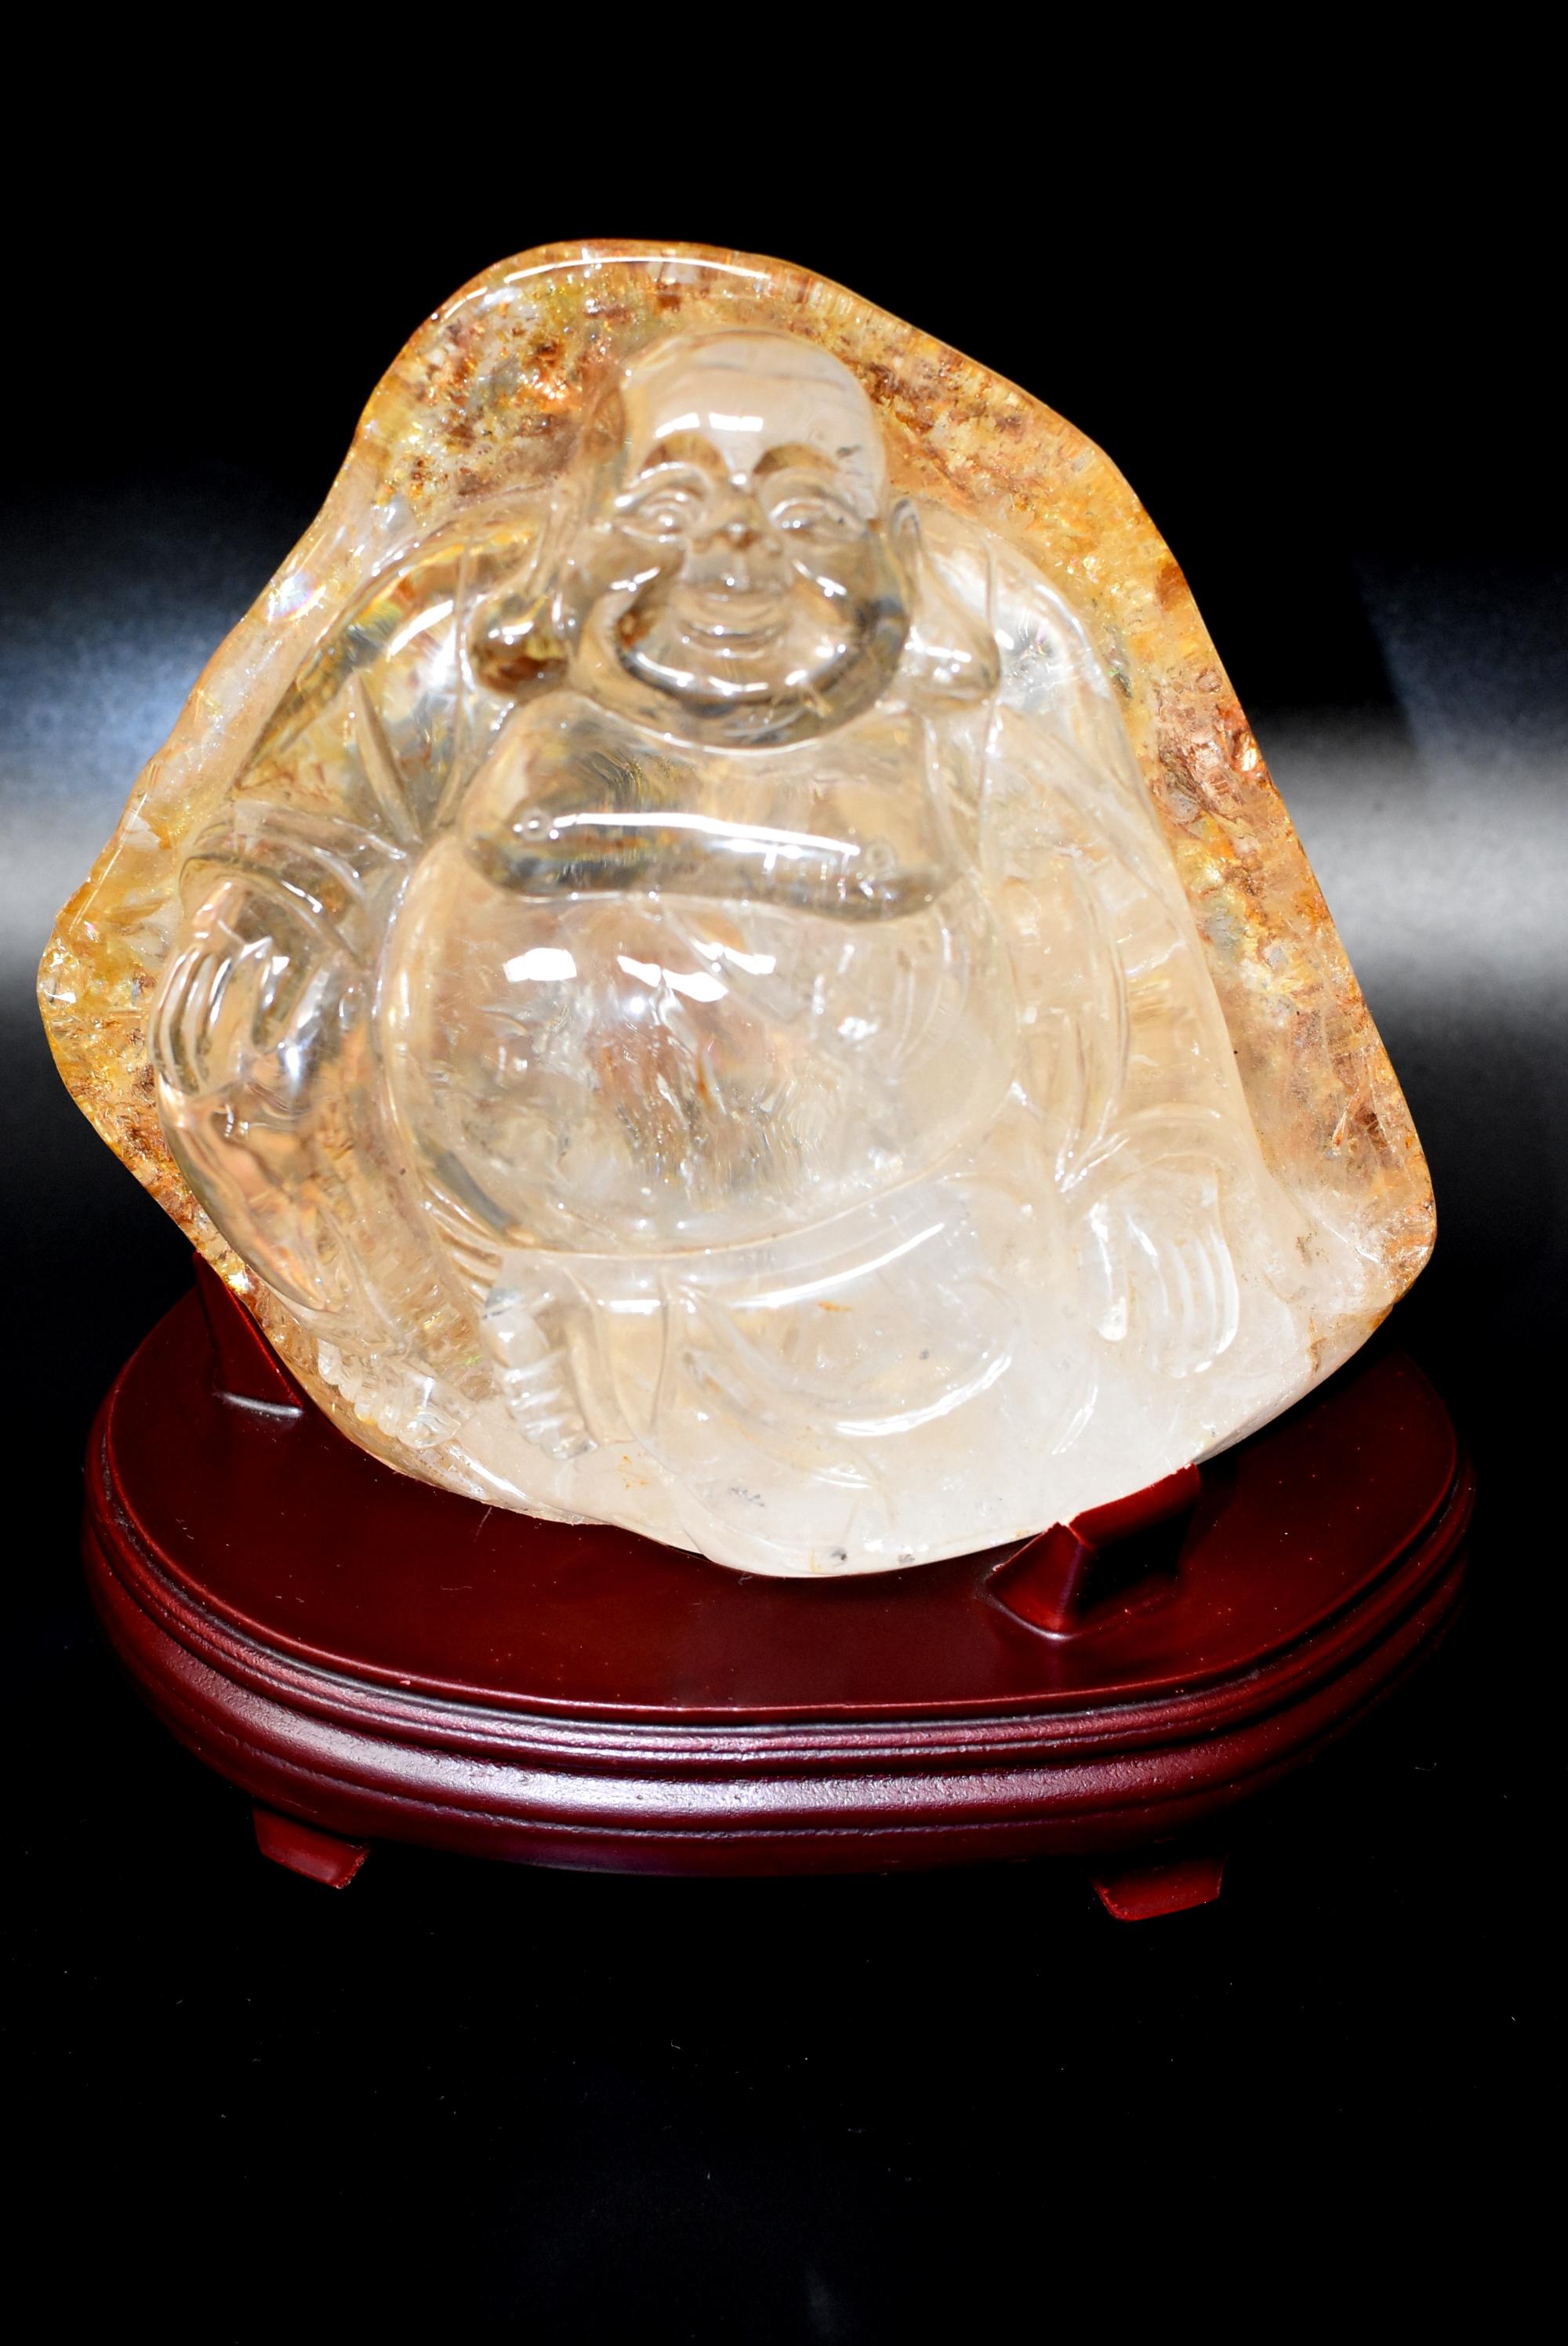 A stunning, extra large, all natural crystal sculpture of a Chinese Happy Buddha. The boulder is crystal clear with beautiful gold threads and moss covering the back. It weighs an incredible 7 lb total. This is an absolutely beautiful piece that is